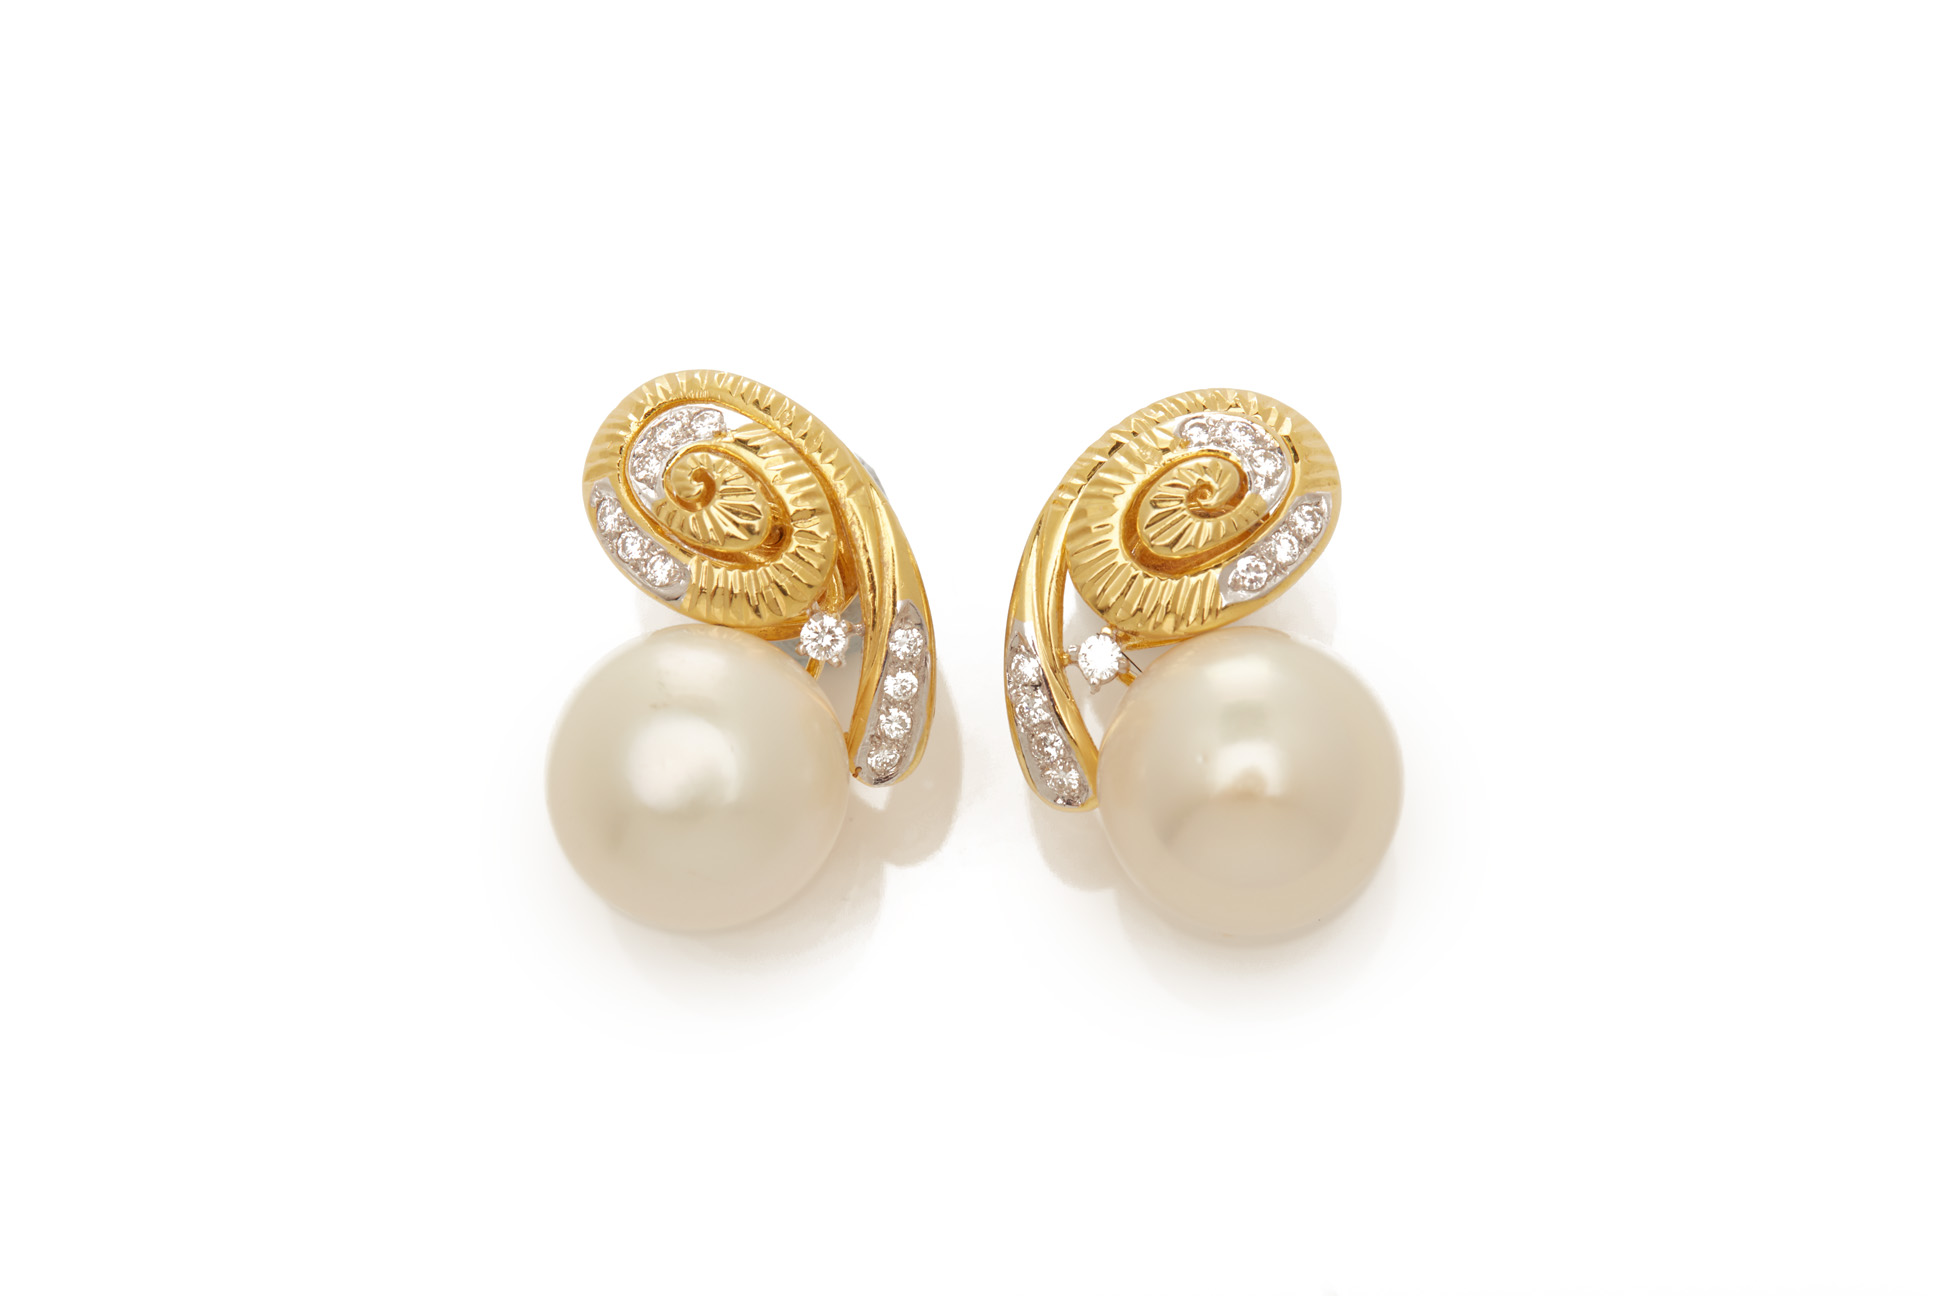 A PAIR OF CULTURED PEARL AND DIAMOND SHELL FORM EARRINGS